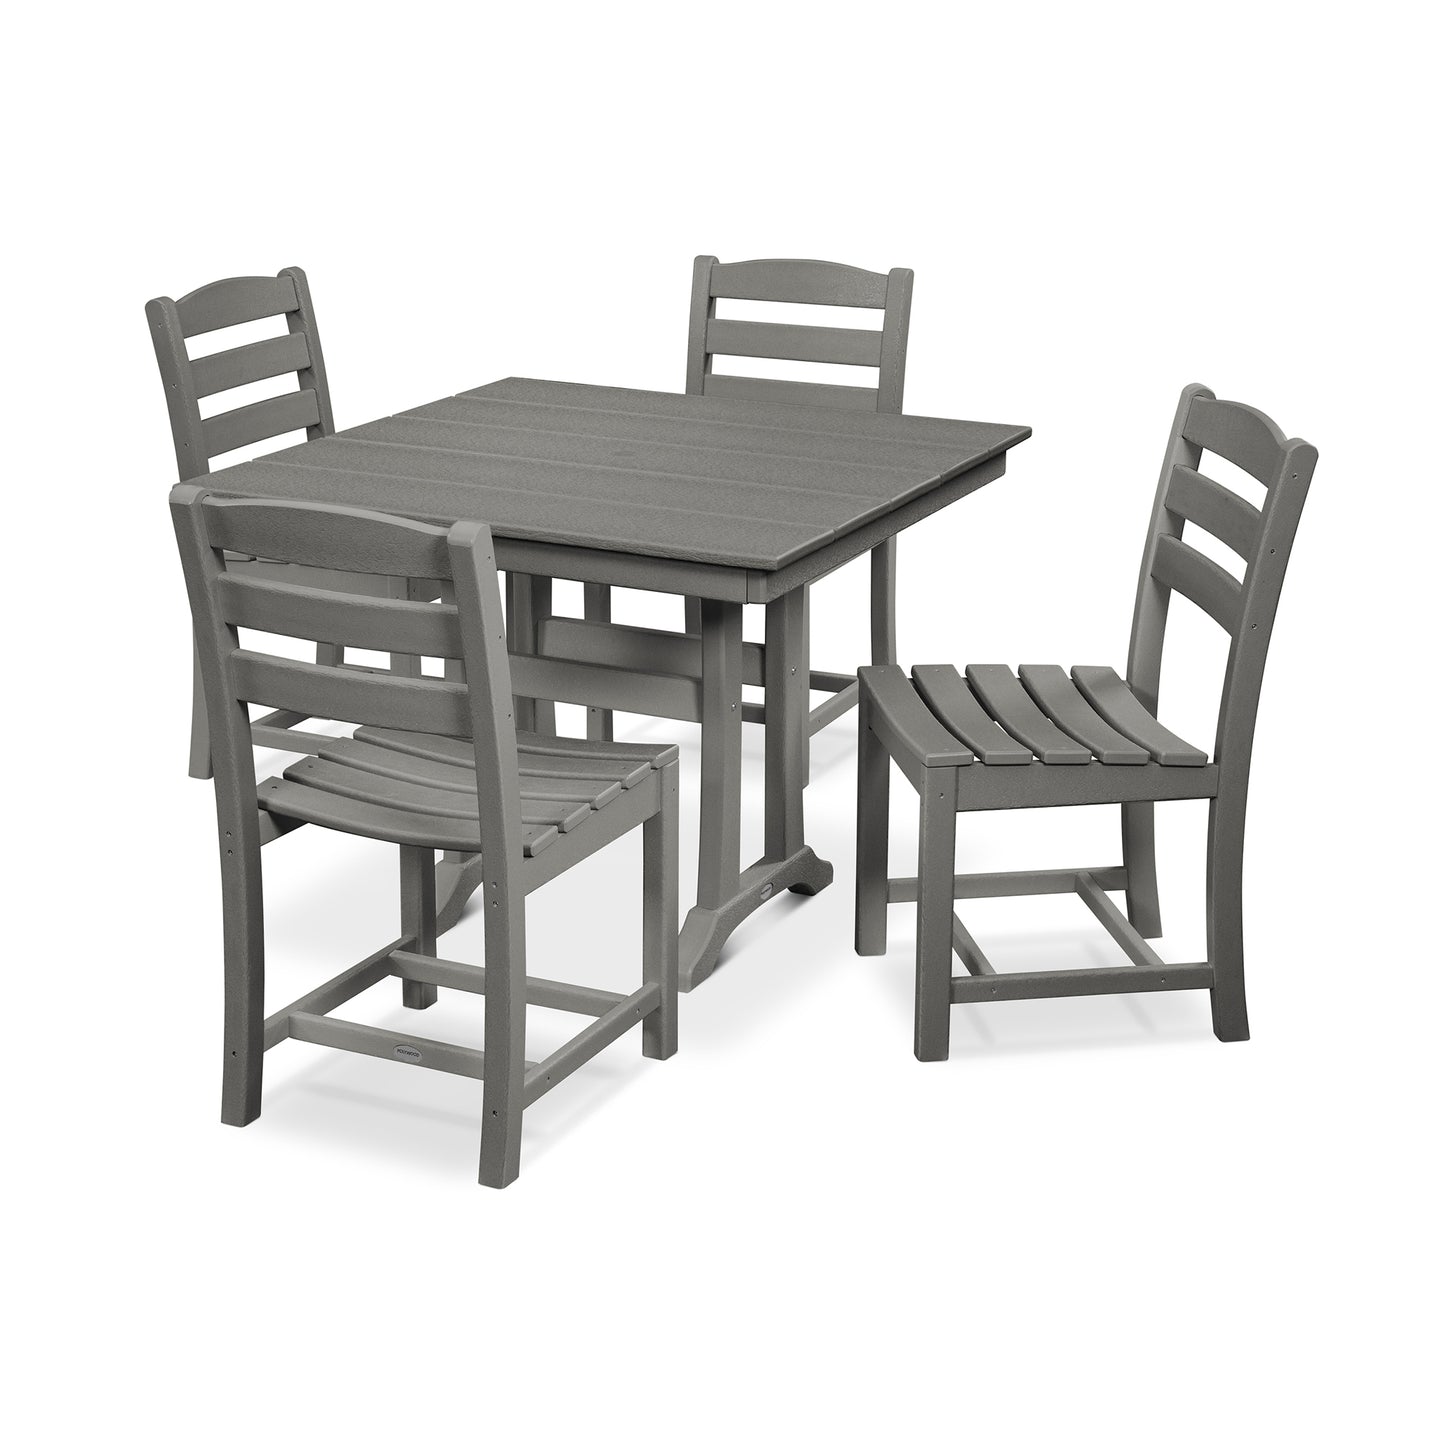 A modern POLYWOOD® La Casa Café 5-Piece Farmhouse Trestle Side Chair Dining Set with four gray slatted chairs and a square table, all made of synthetic materials, displayed on a white background.